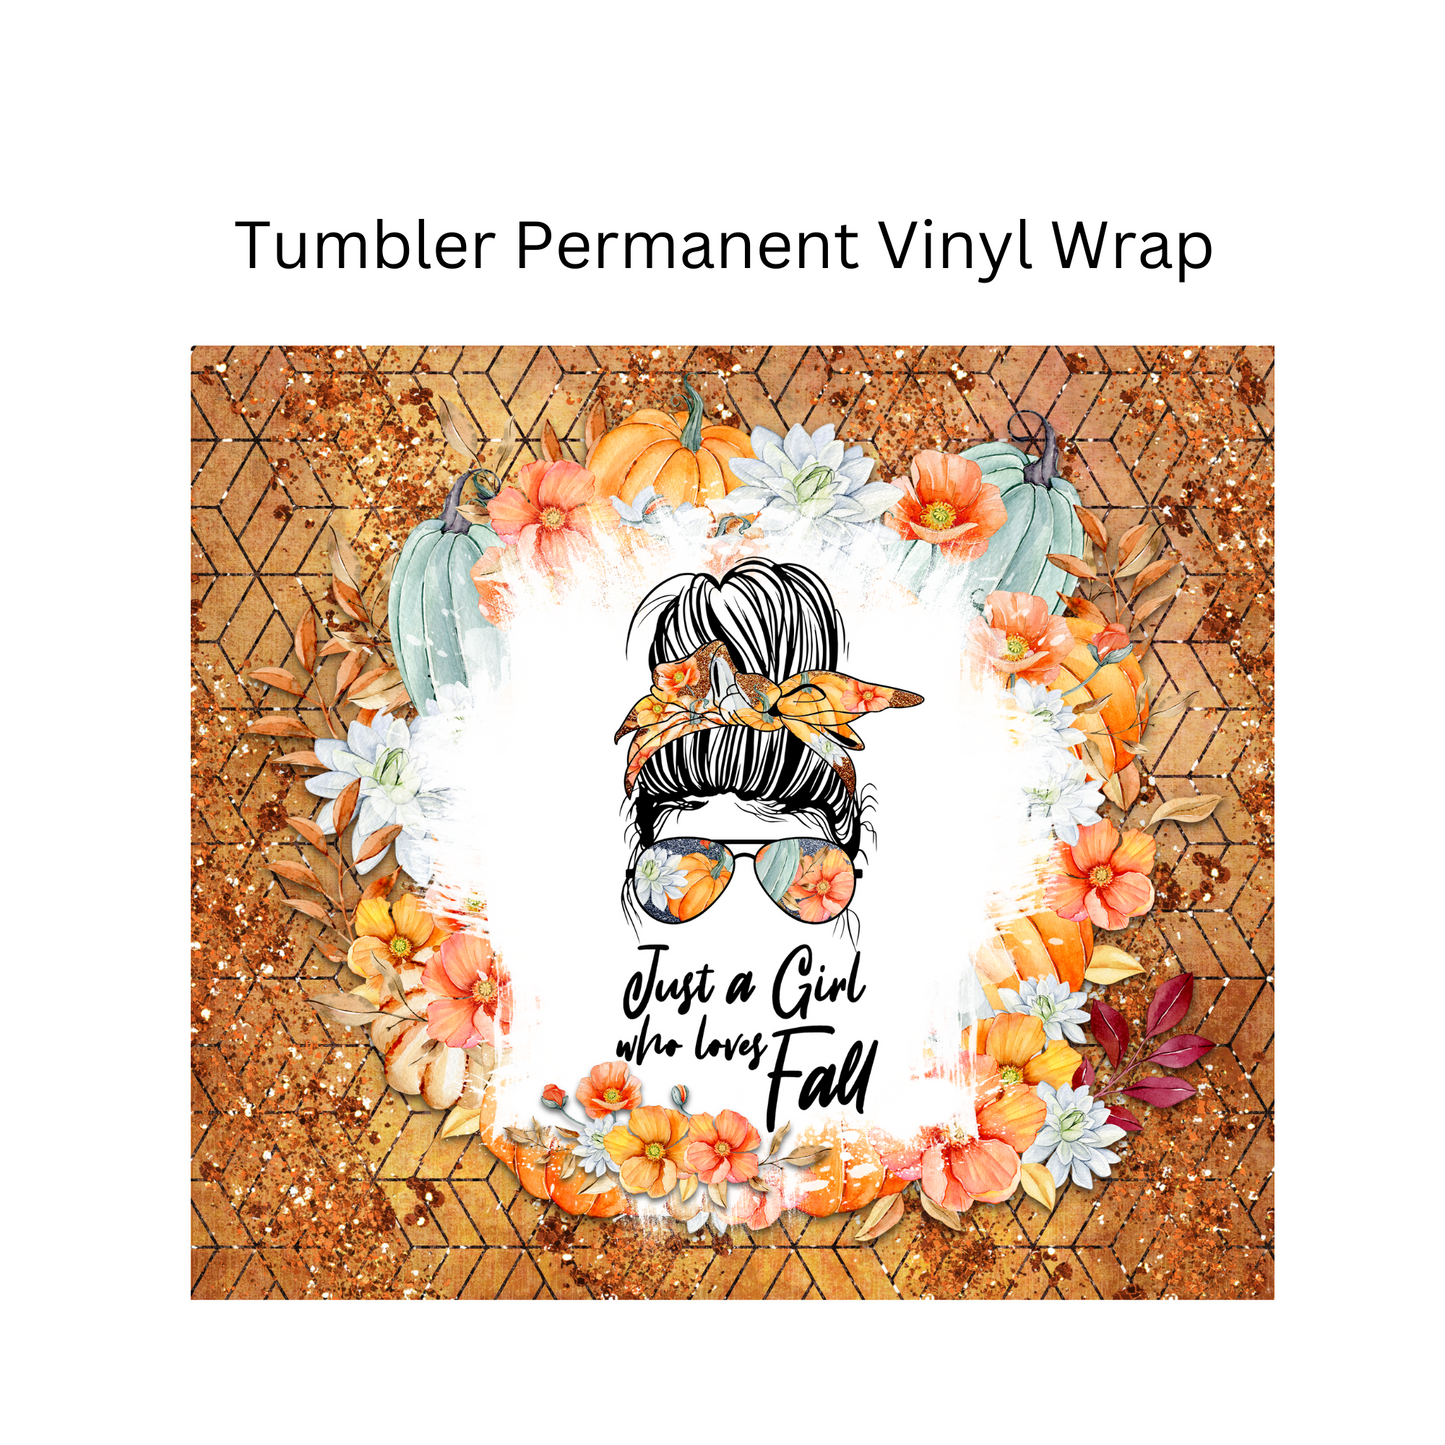 Just a Girl Who Loves Fall Permanent Vinyl Wrap